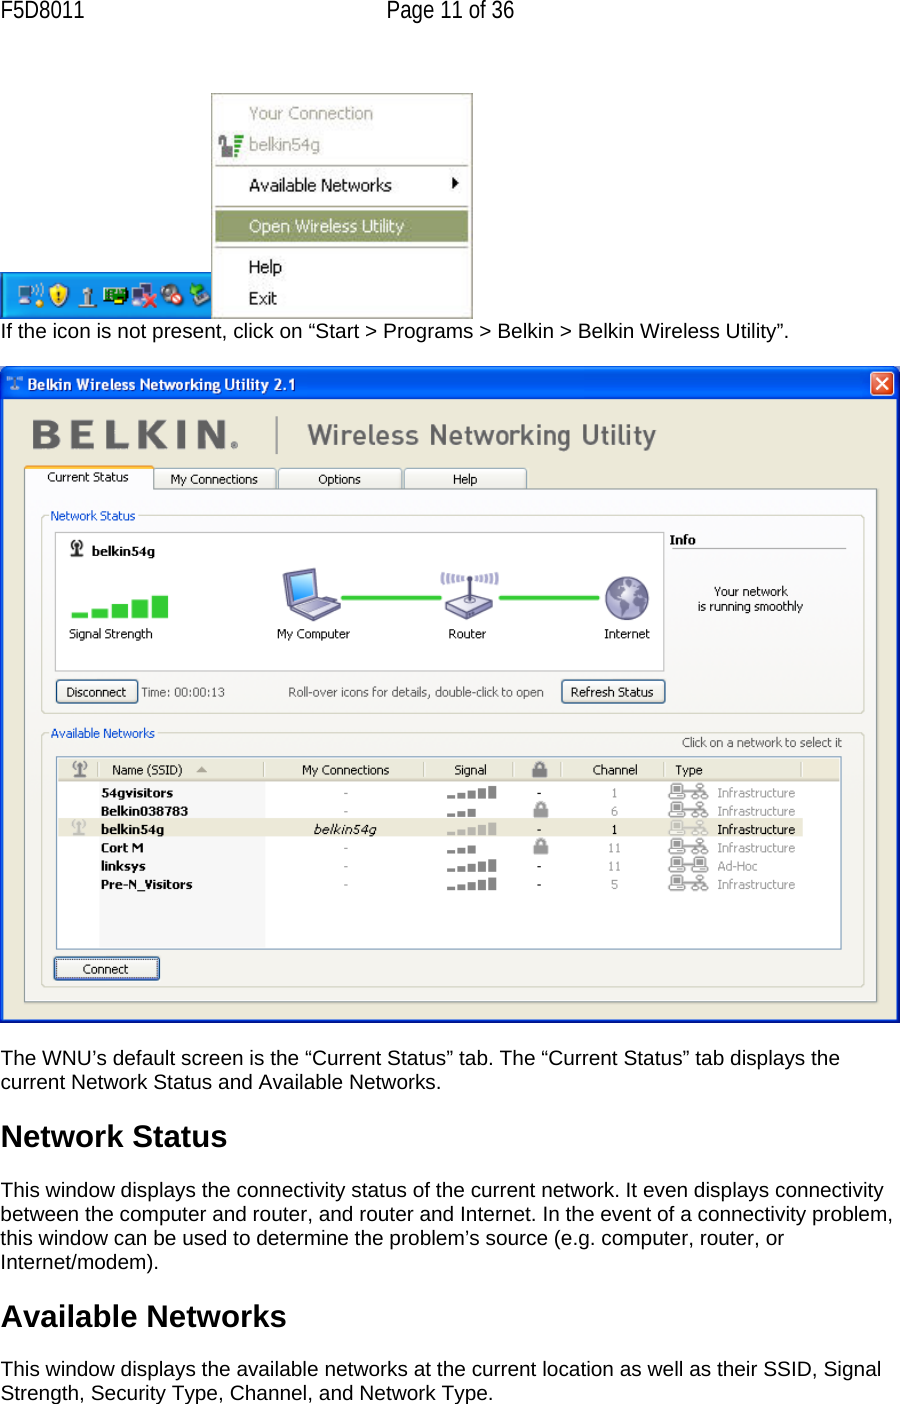 F5D8011  Page 11 of 36   If the icon is not present, click on “Start &gt; Programs &gt; Belkin &gt; Belkin Wireless Utility”.    The WNU’s default screen is the “Current Status” tab. The “Current Status” tab displays the current Network Status and Available Networks.  Network Status  This window displays the connectivity status of the current network. It even displays connectivity between the computer and router, and router and Internet. In the event of a connectivity problem, this window can be used to determine the problem’s source (e.g. computer, router, or Internet/modem).  Available Networks  This window displays the available networks at the current location as well as their SSID, Signal Strength, Security Type, Channel, and Network Type. 